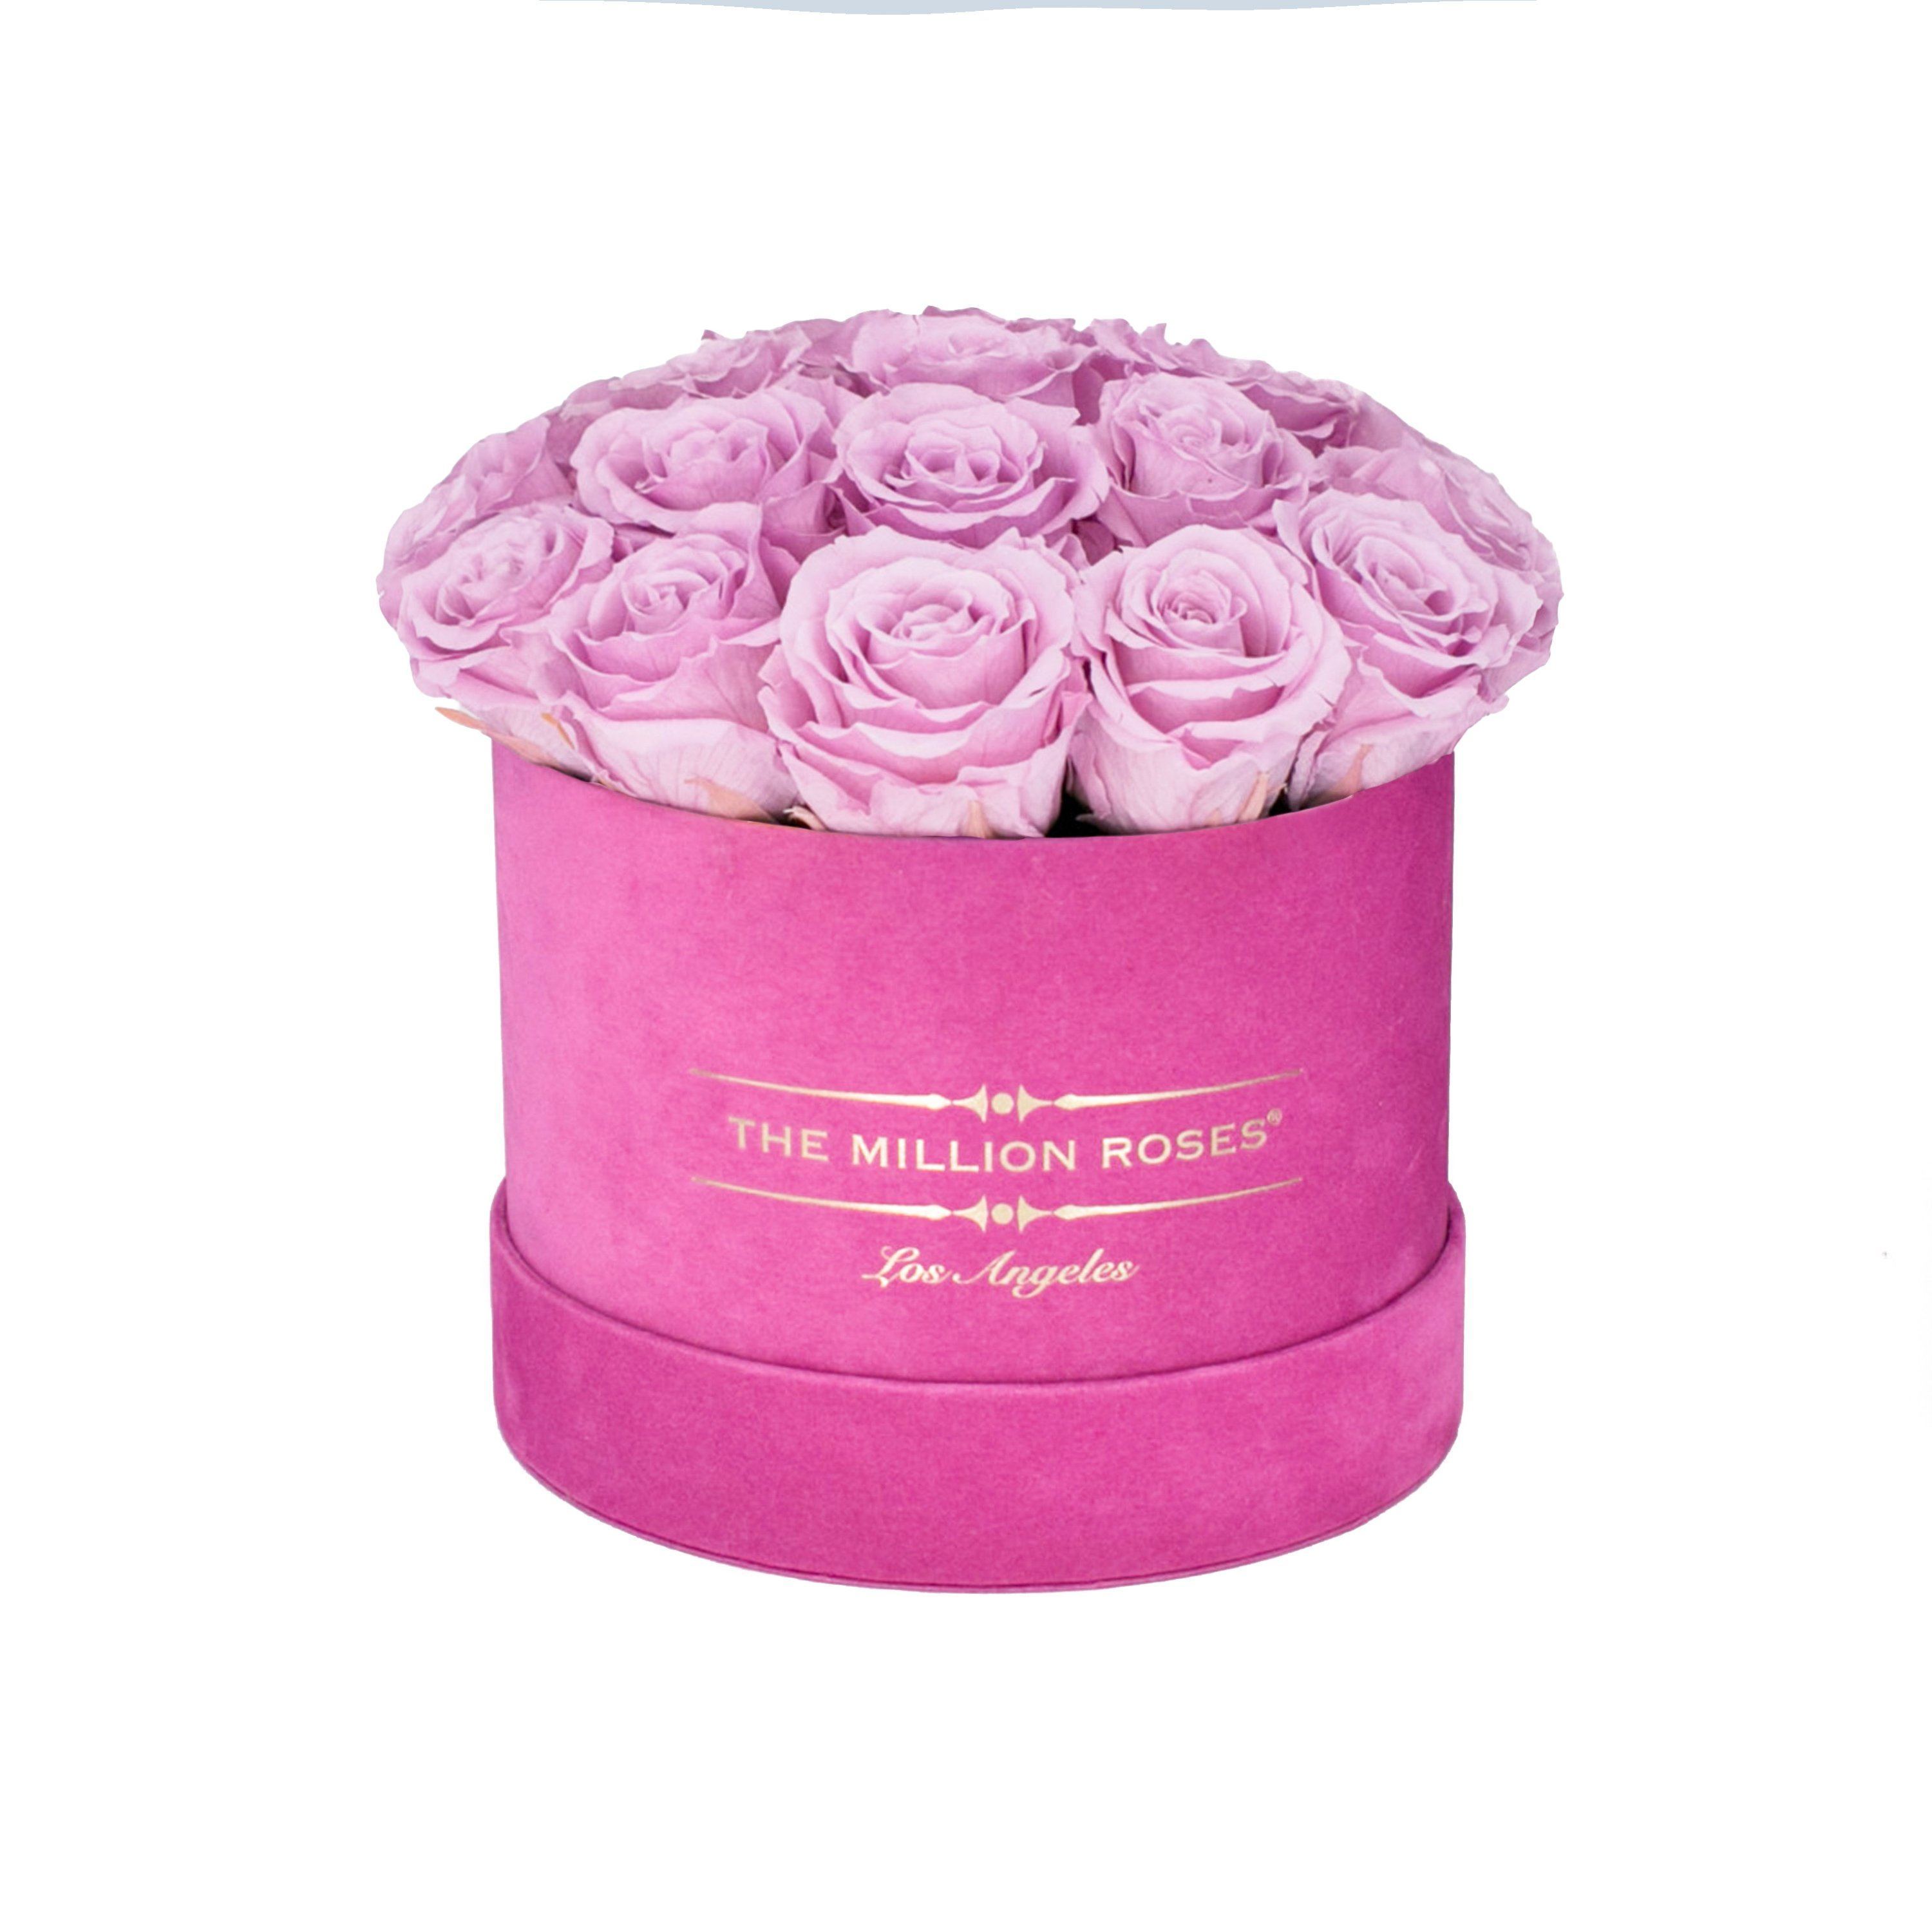 classic round box - hot-pink suede box - light-pink roses pink eternity roses - the million roses